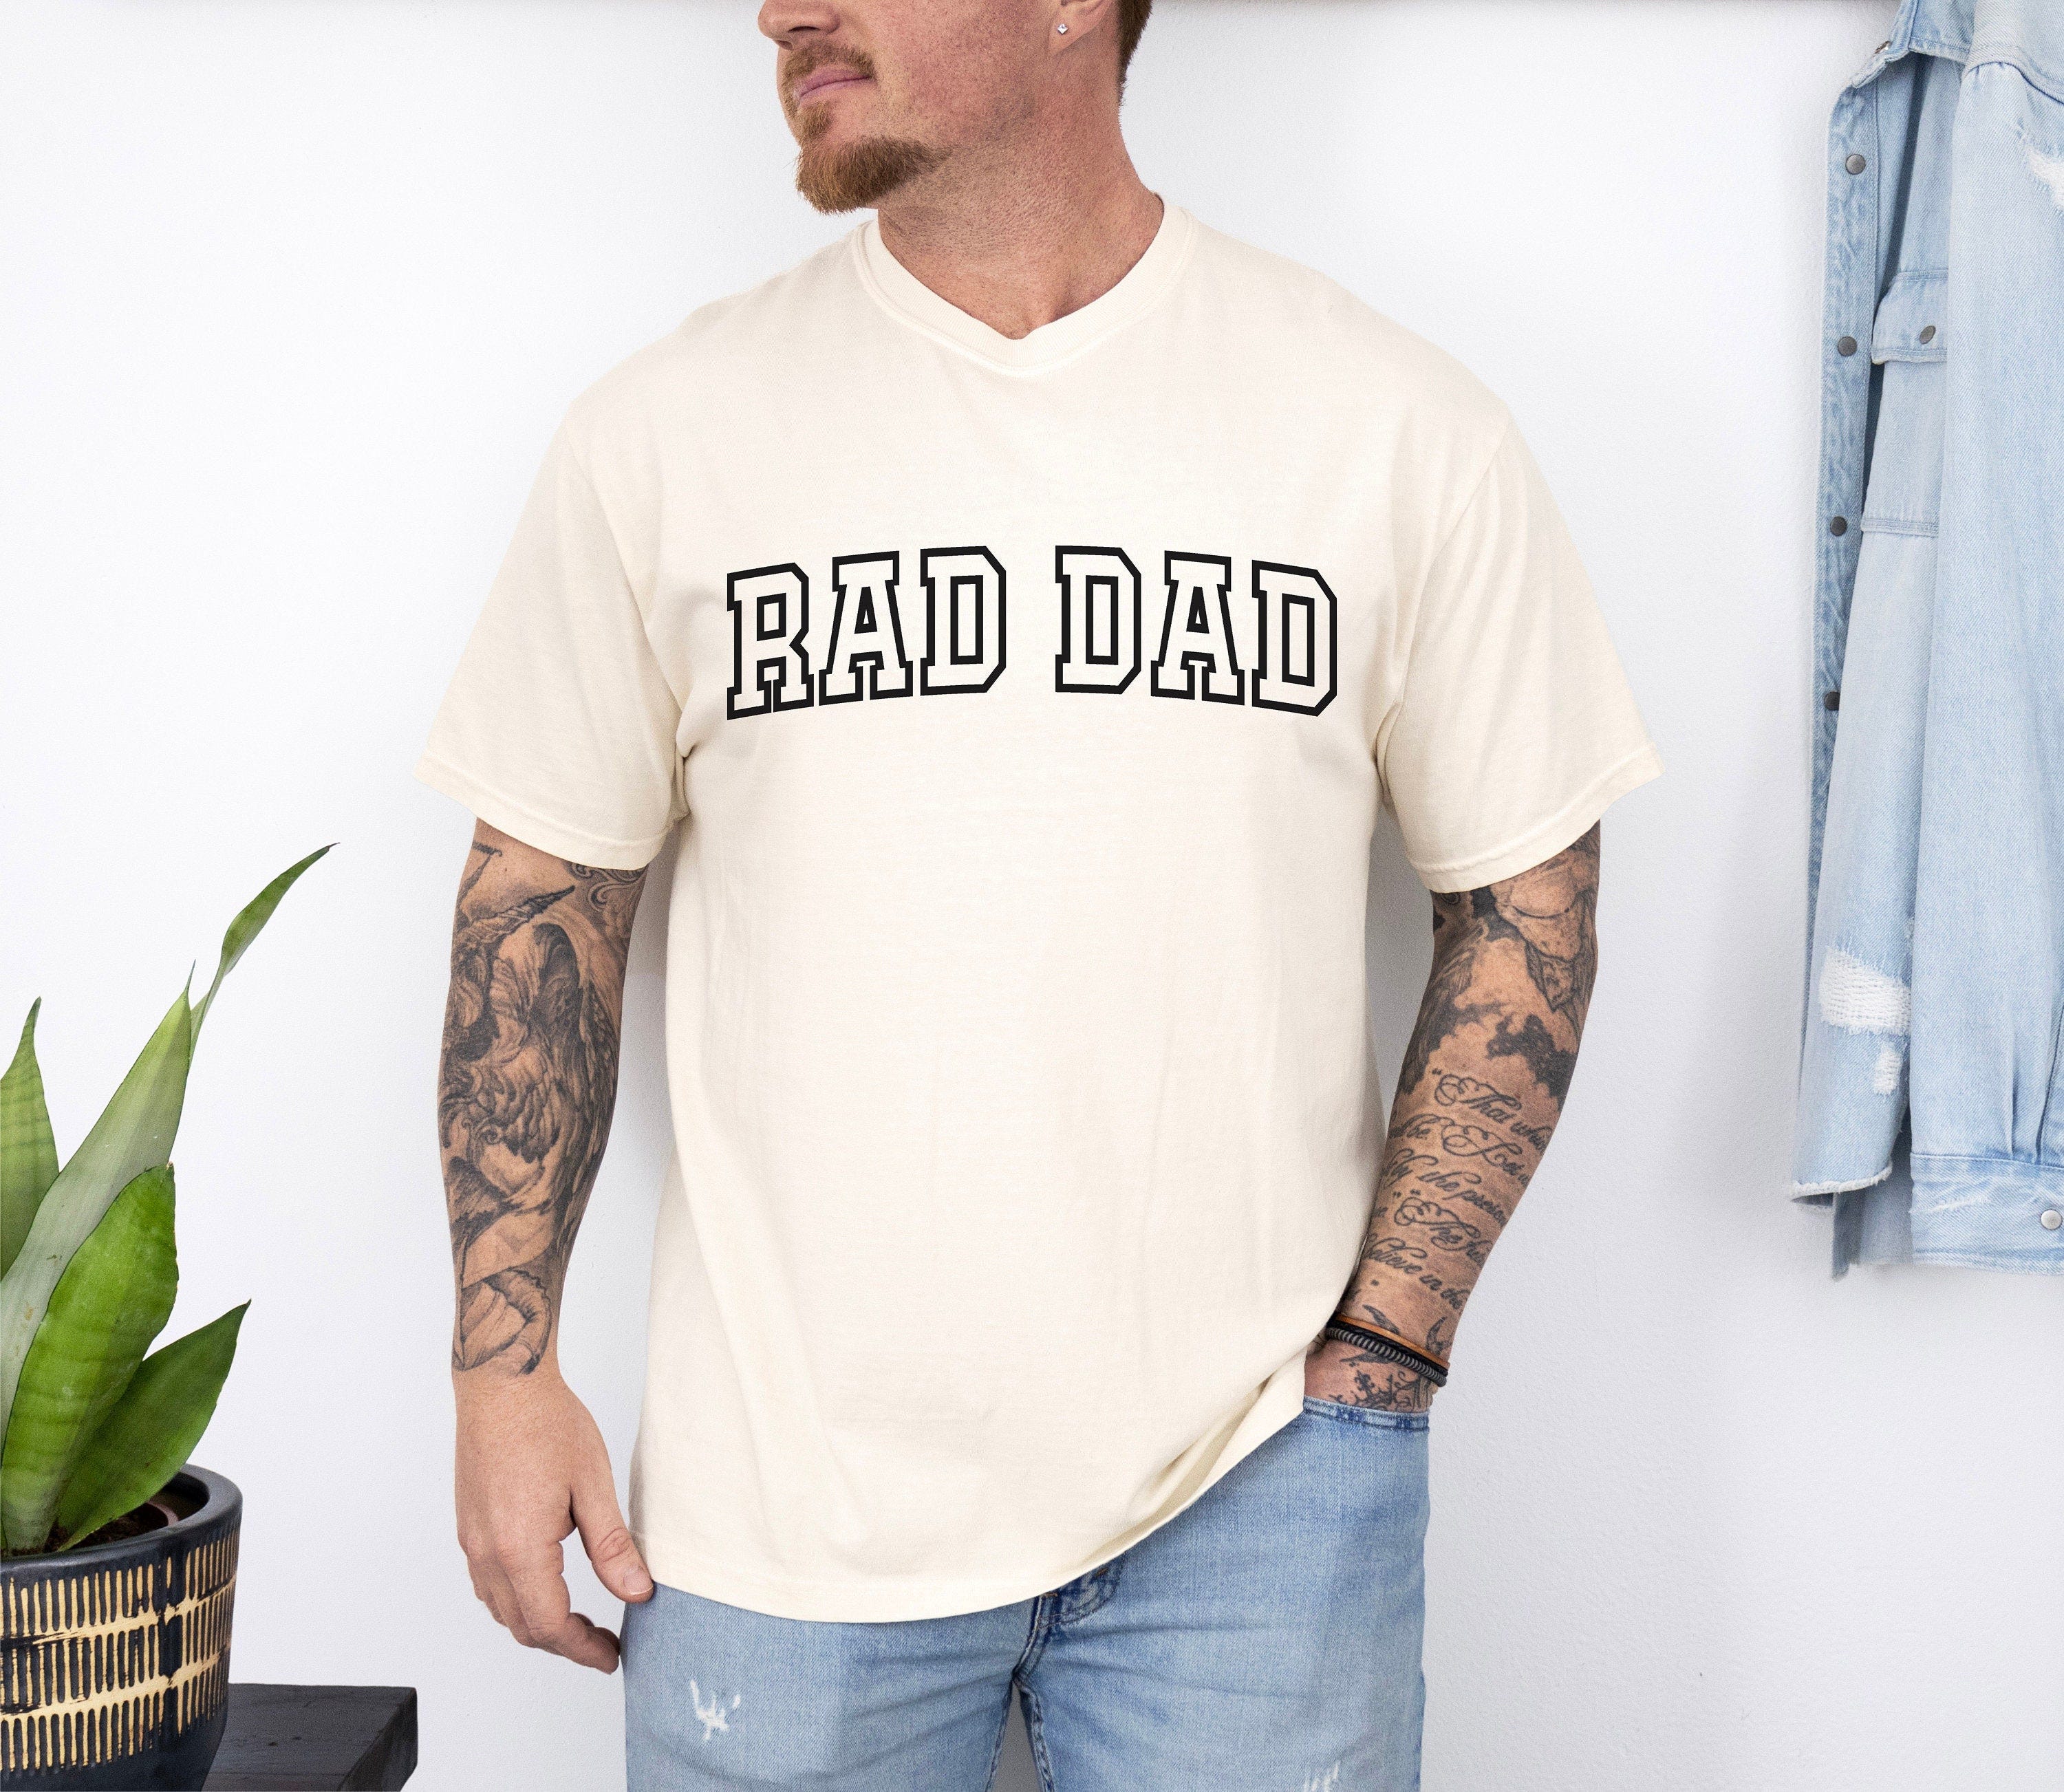 Rad Dads Shirt, Cool Dad Club T Shirt, Gift for Dad, Father